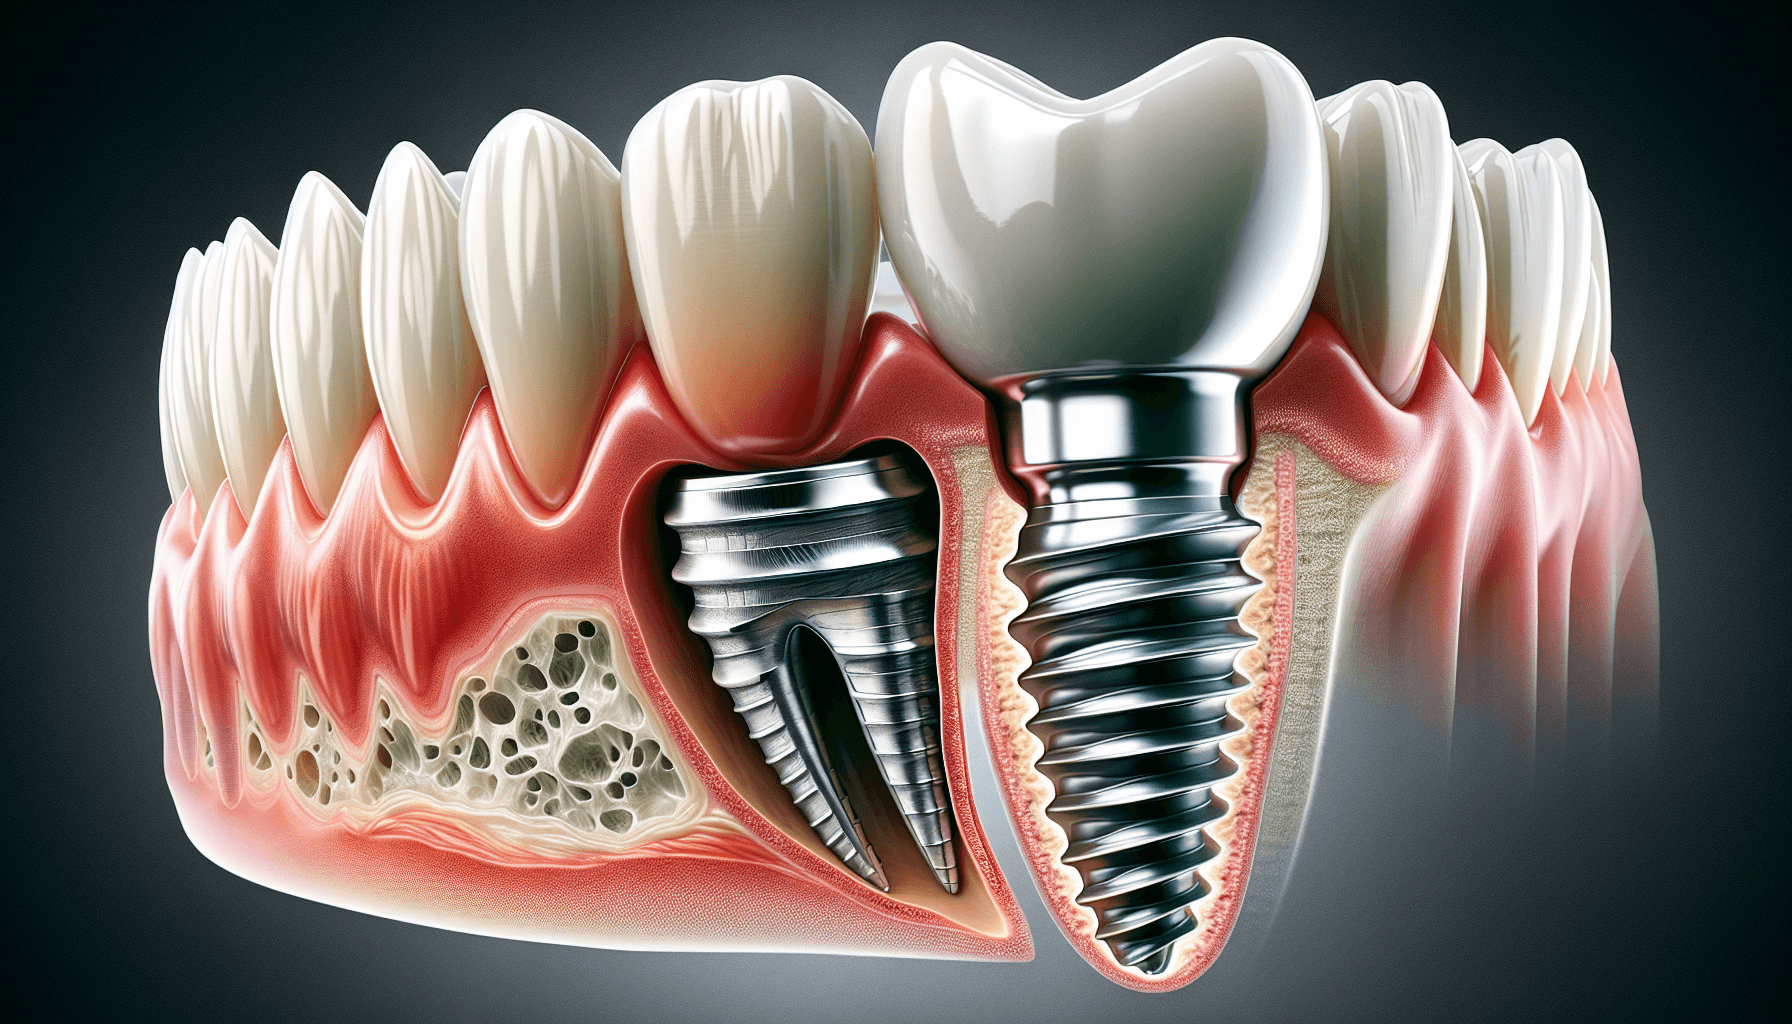 Illustration of the resemblance of dental implants to natural teeth